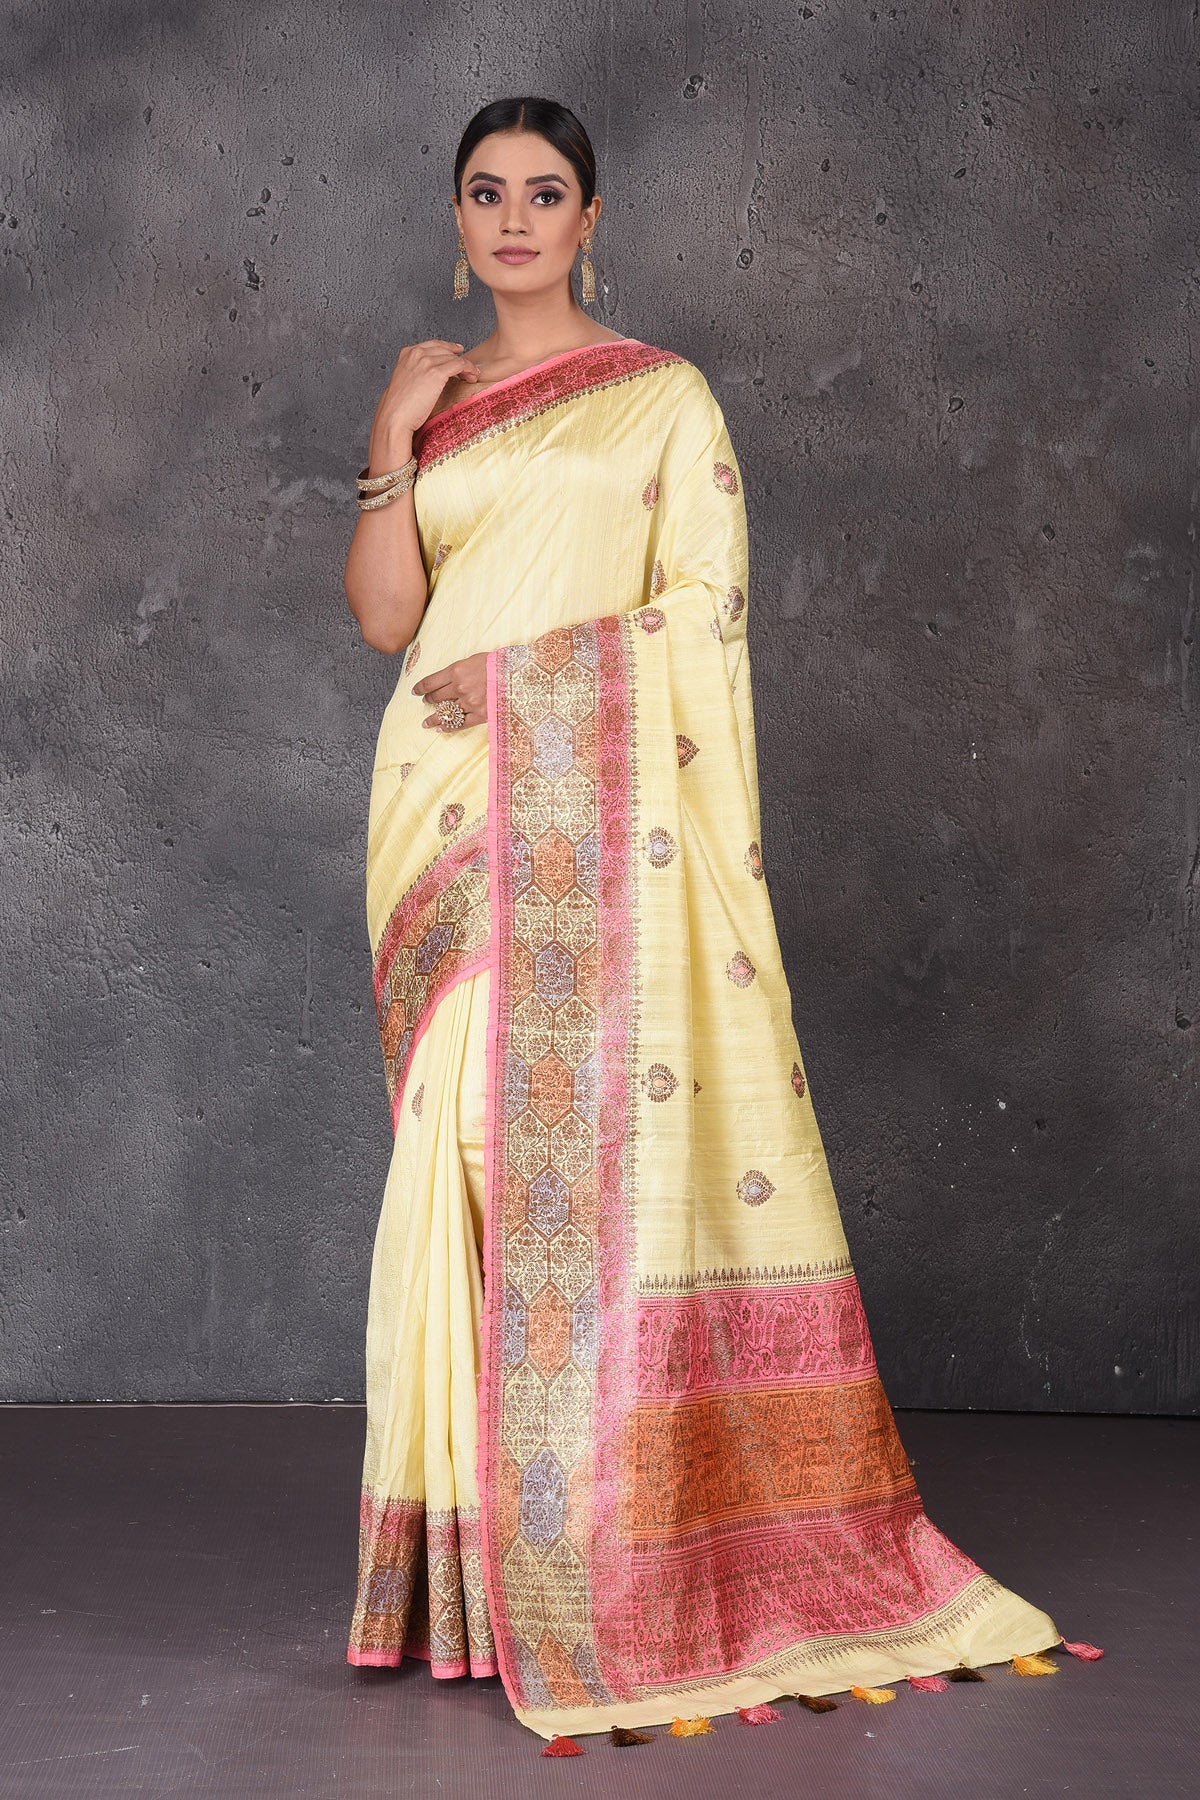 Buy stunning light yellow dupion silk saree online in USA with antique zari border. Flaunt your ethnic style on special occasions with latest designer sarees, pure silk sarees, handwoven sarees, Kanchipuram silk sarees, embroidered sarees, georgette sarees, party sarees from Pure Elegance Indian saree store in USA.-full view